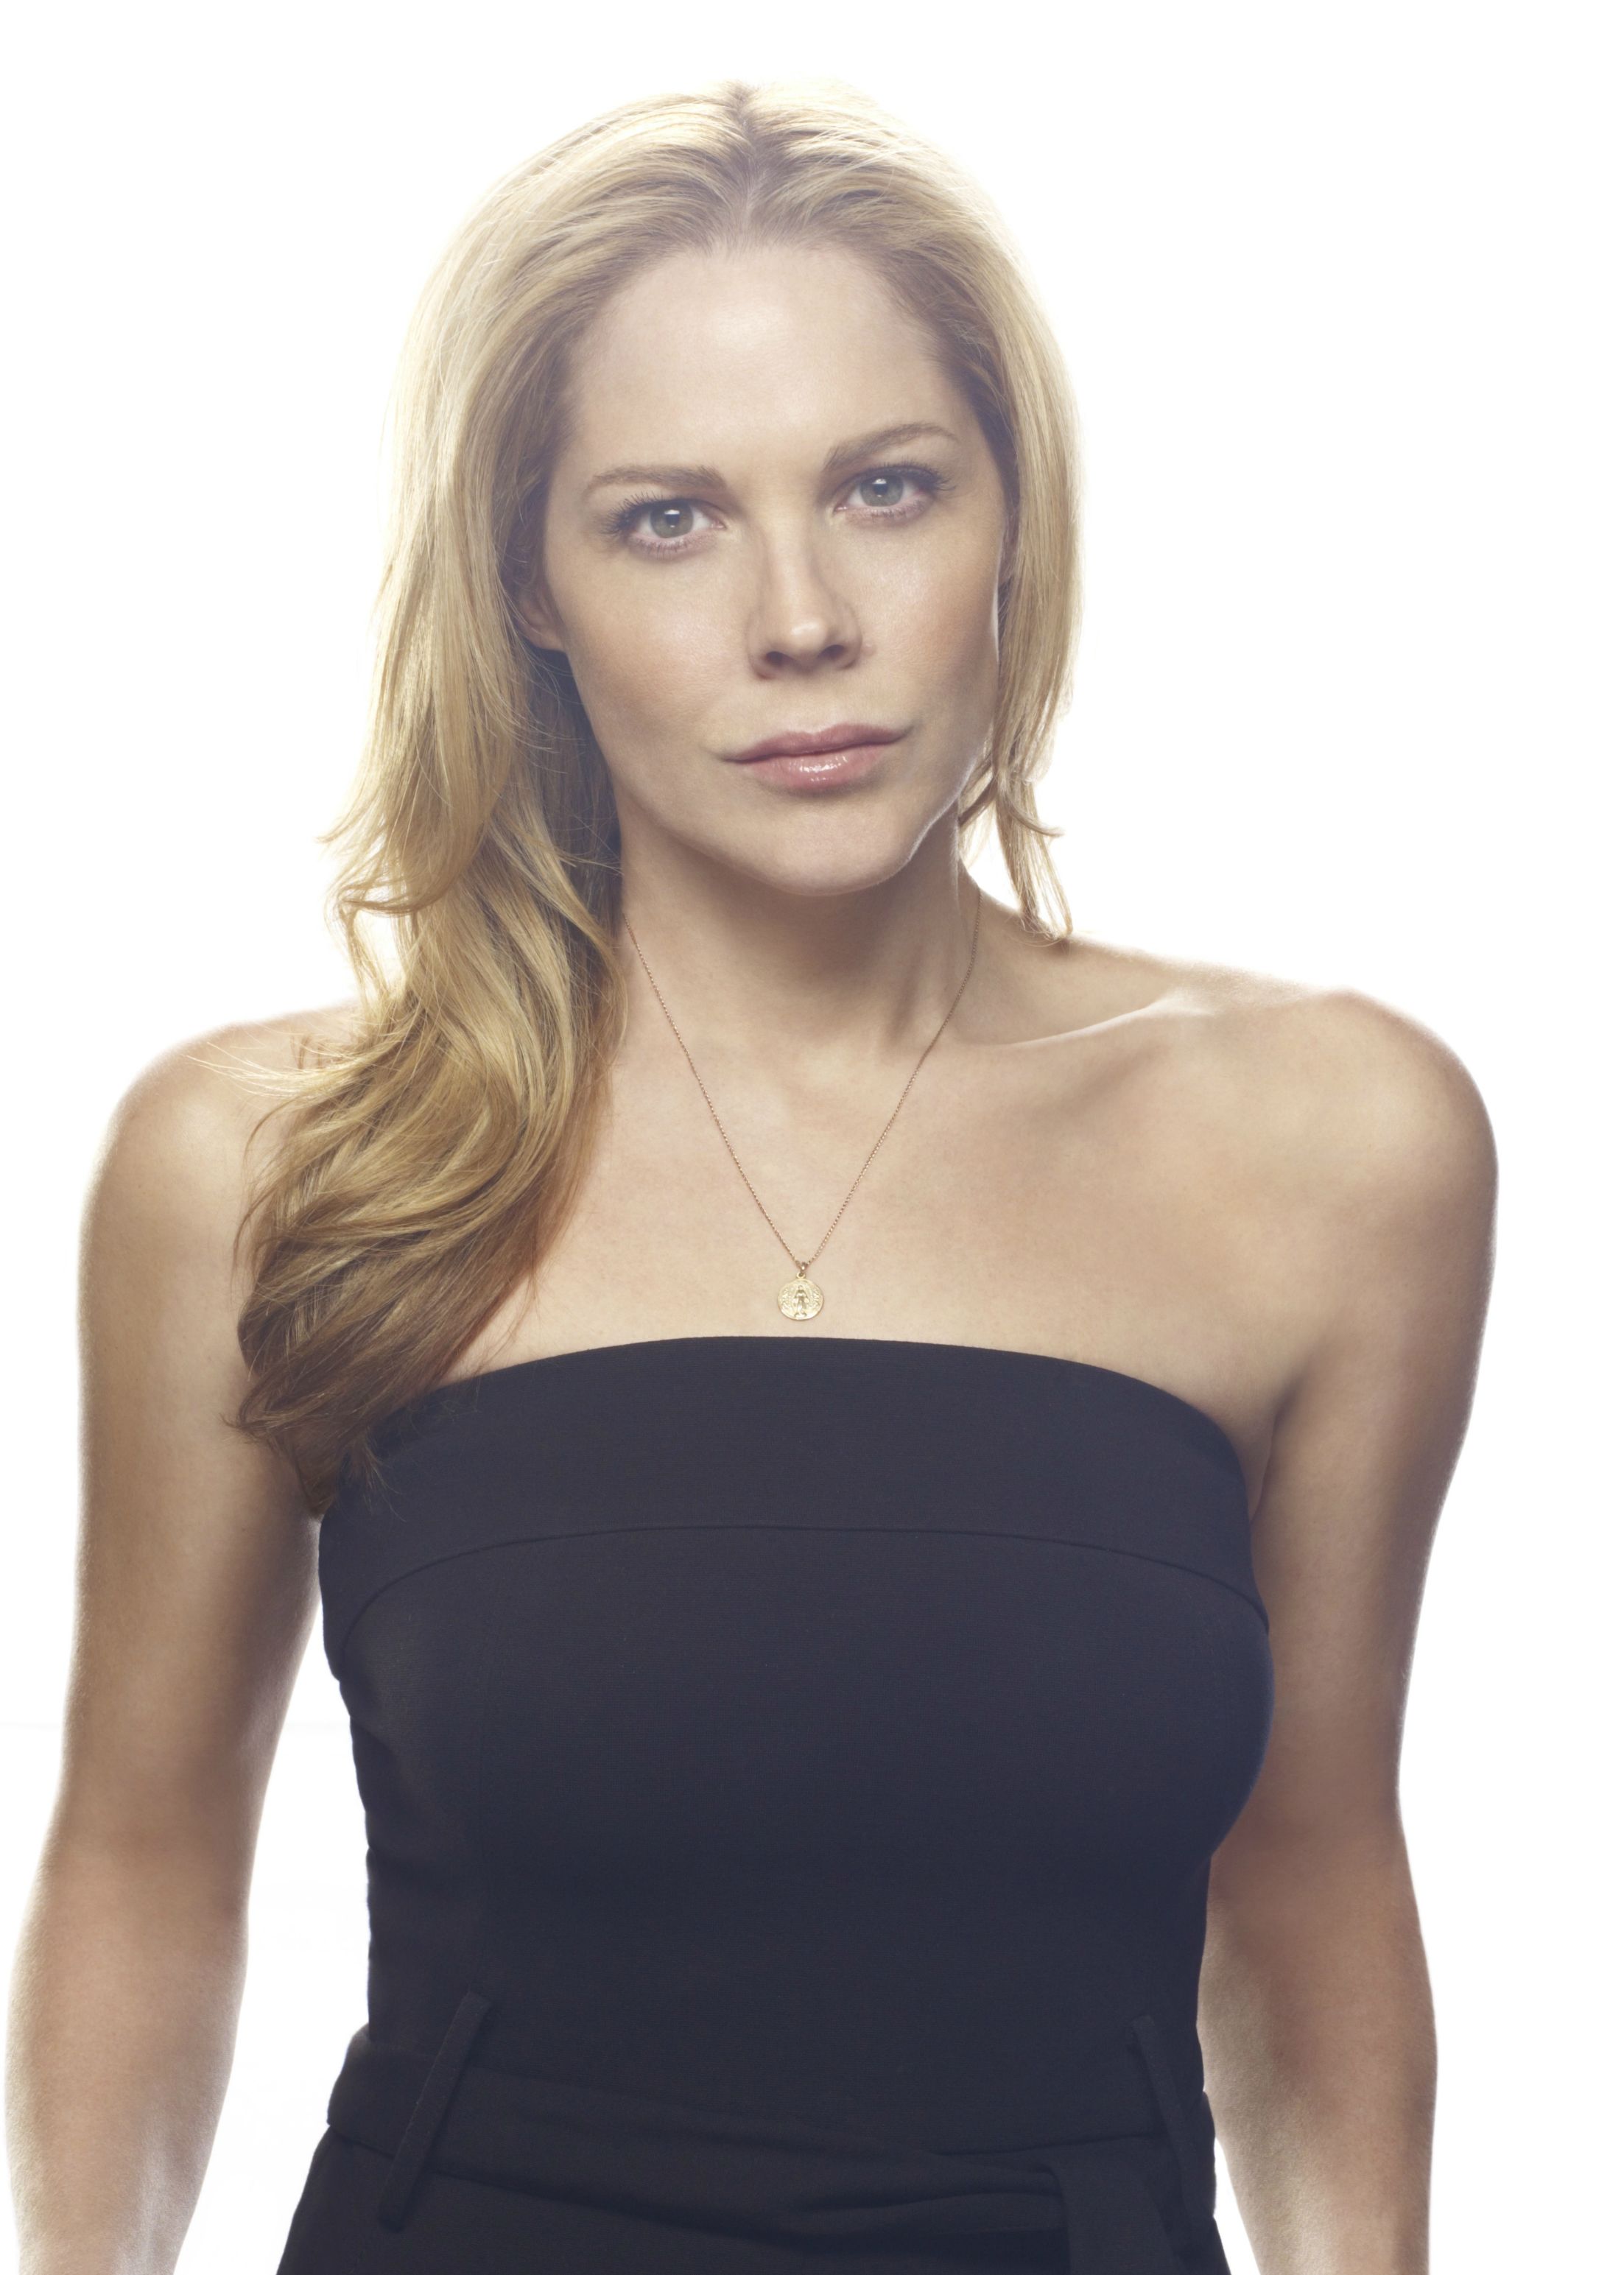 55+ Hot Pictures Of Mary McCormack Are So Damn Sexy That We Don’t Deserve Her | Best Of Comic Books